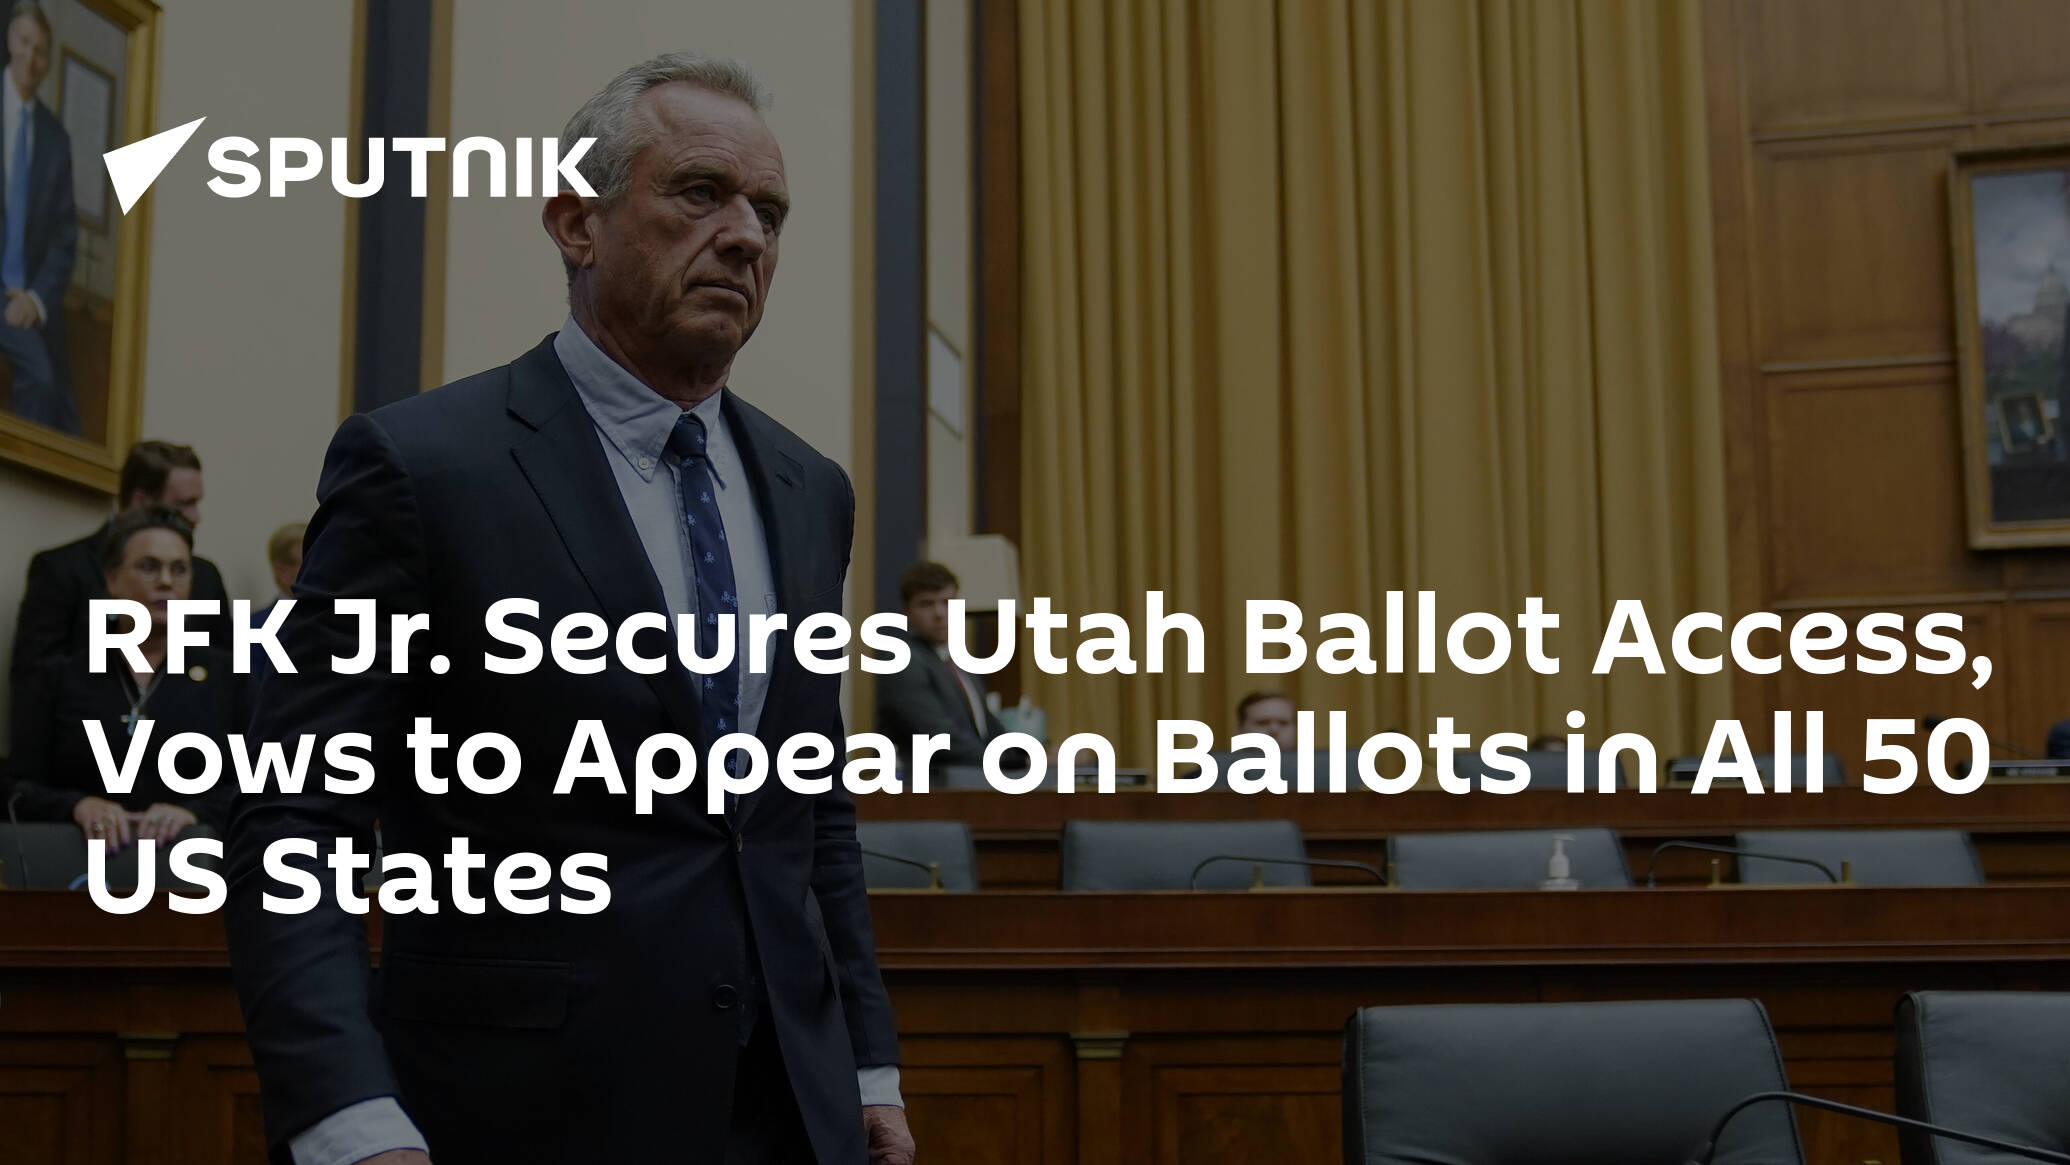 RFK Jr. Secures Utah Ballot Access, Vows to Appear on Ballots in All 50 US States